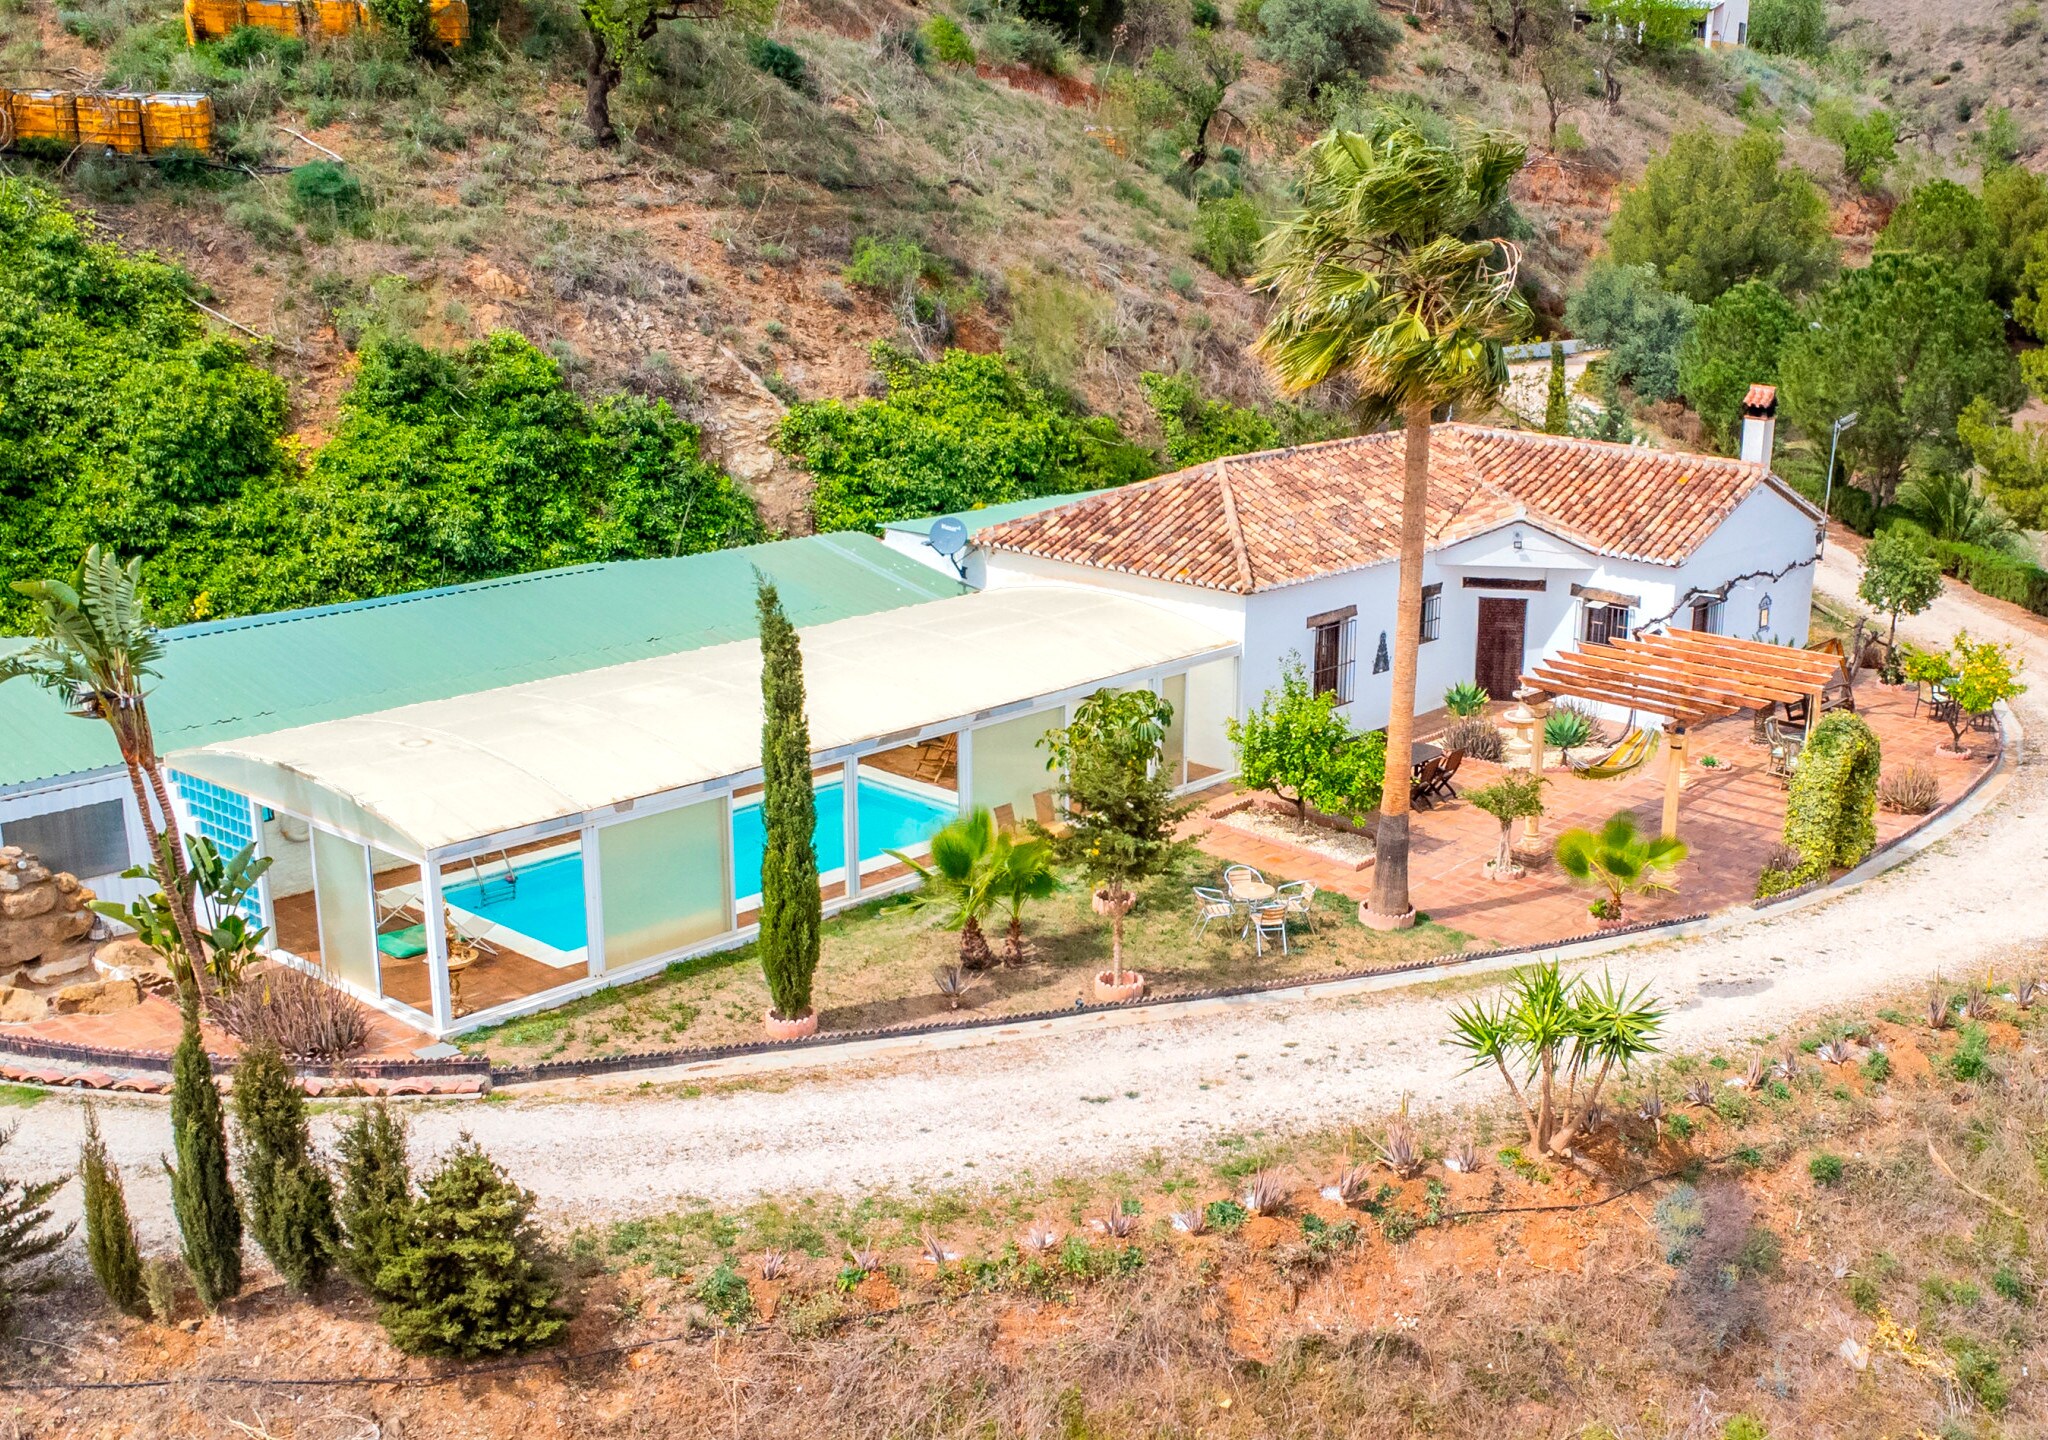 Rural lodging oriented to families. With indoor swimming pool and high privacy.